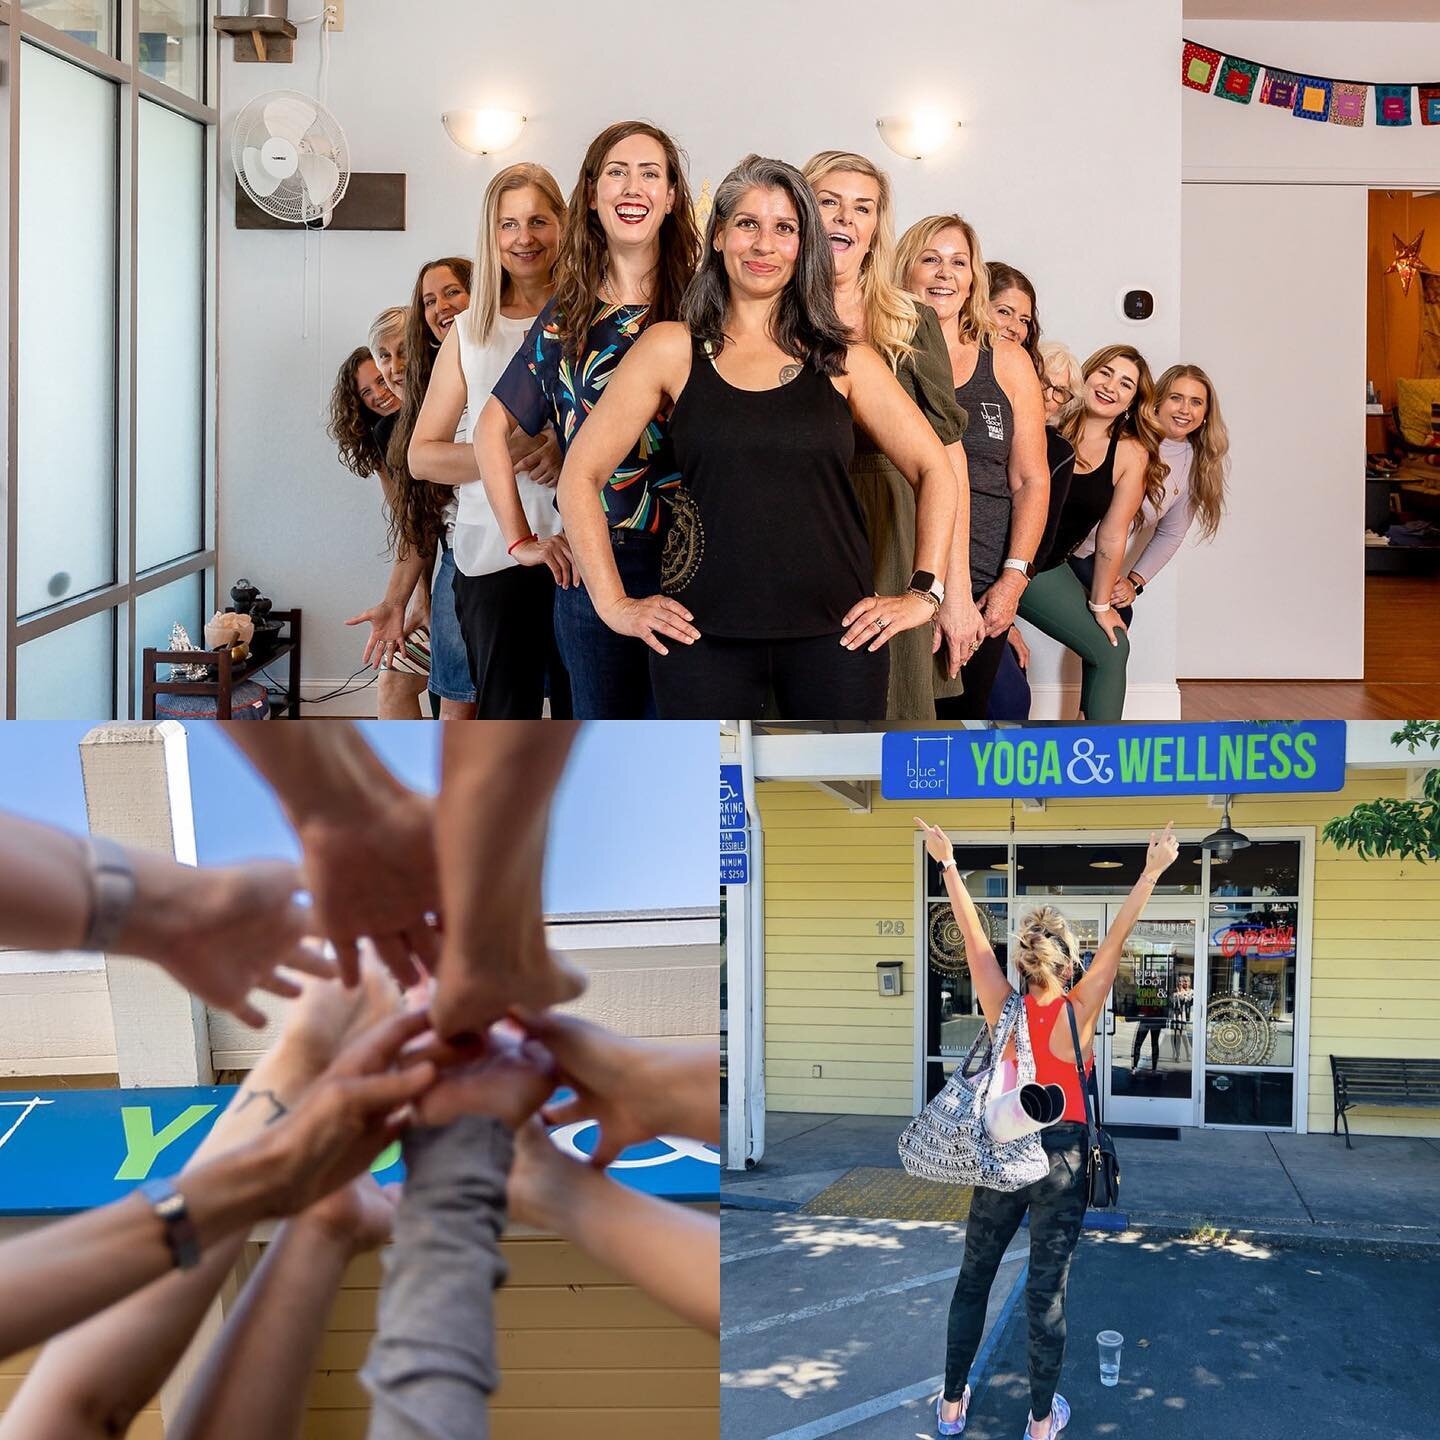 At Blue Door they believe that yoga+wellness are a doorway to being yourself. Visit Blue Door to find an amazing selection of gifts to pamper and nurture the body and soul. Give the gift of wellness when you purchase a certificate for a loved one or 